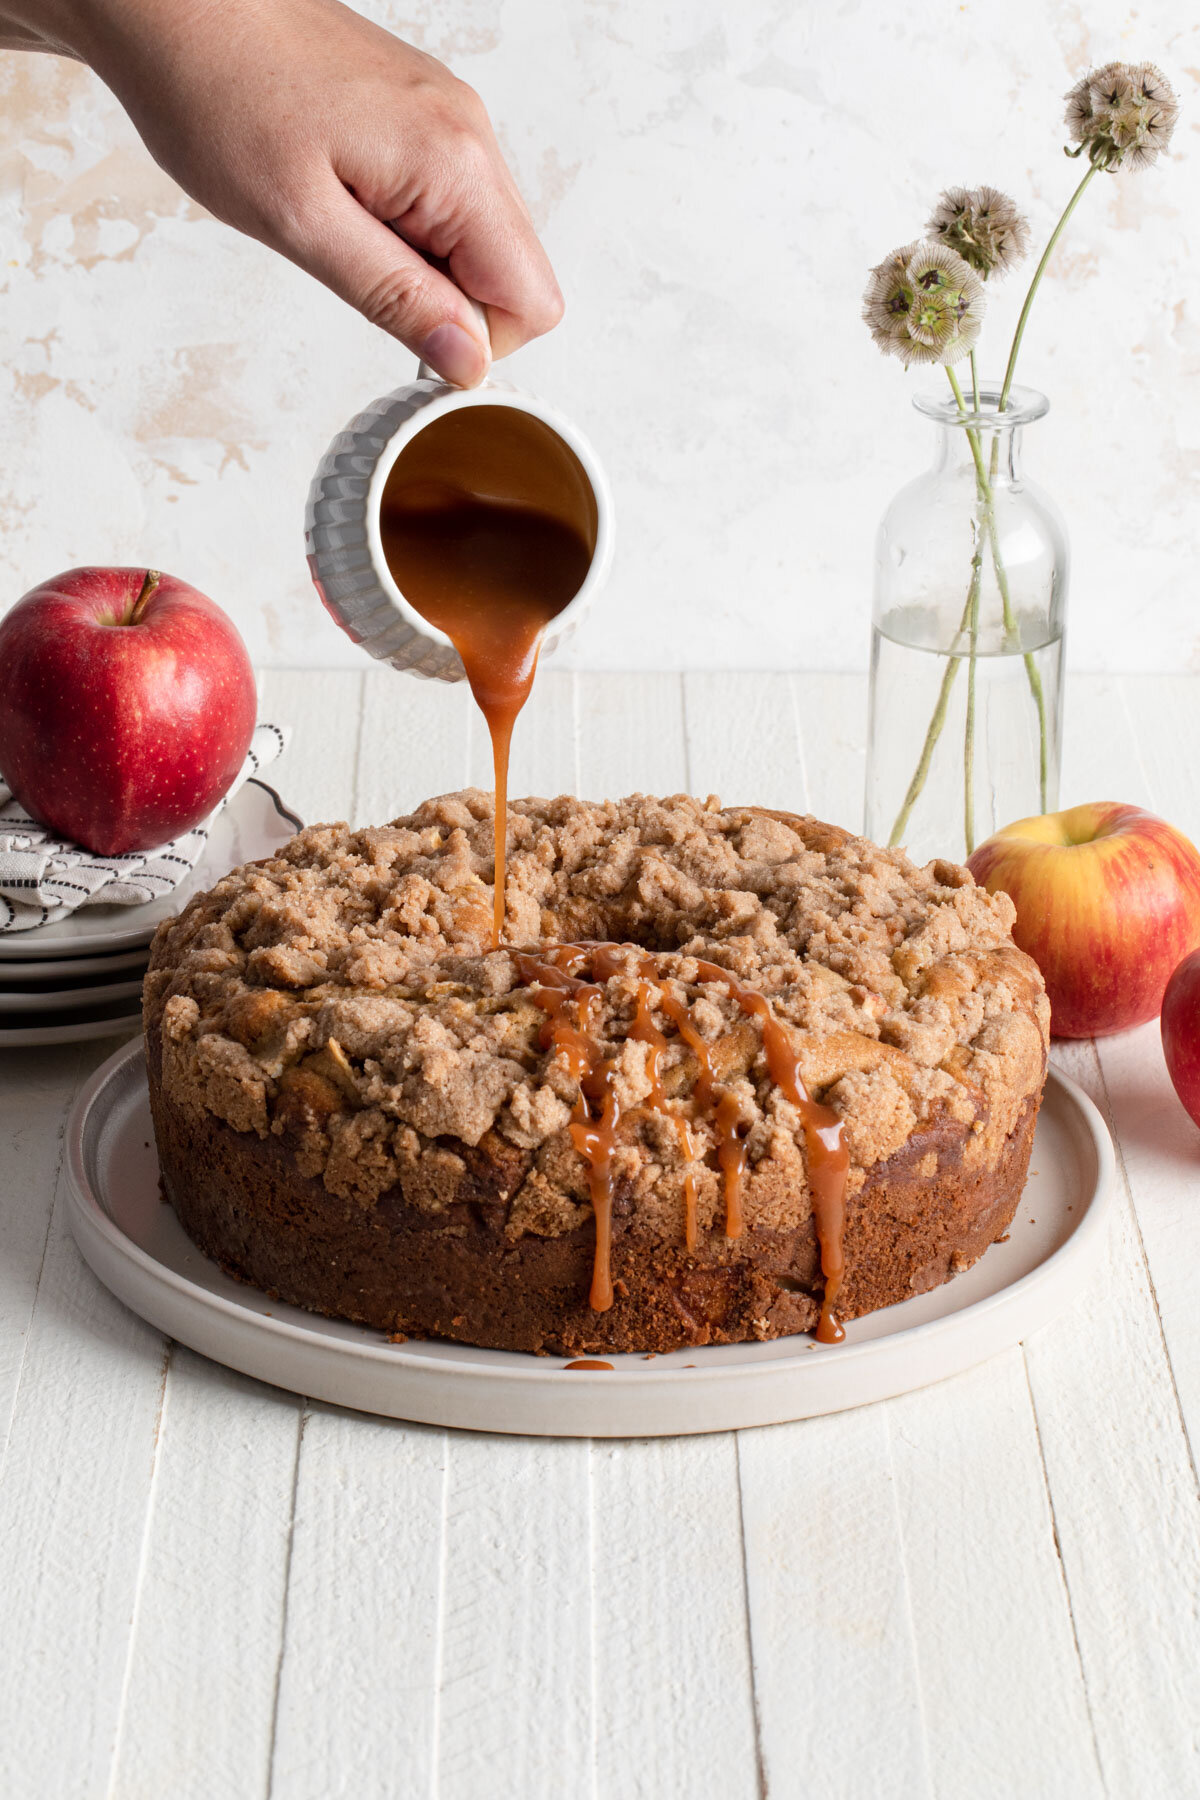 Apple Coffee Cake with caramel sauce being poured over the top.